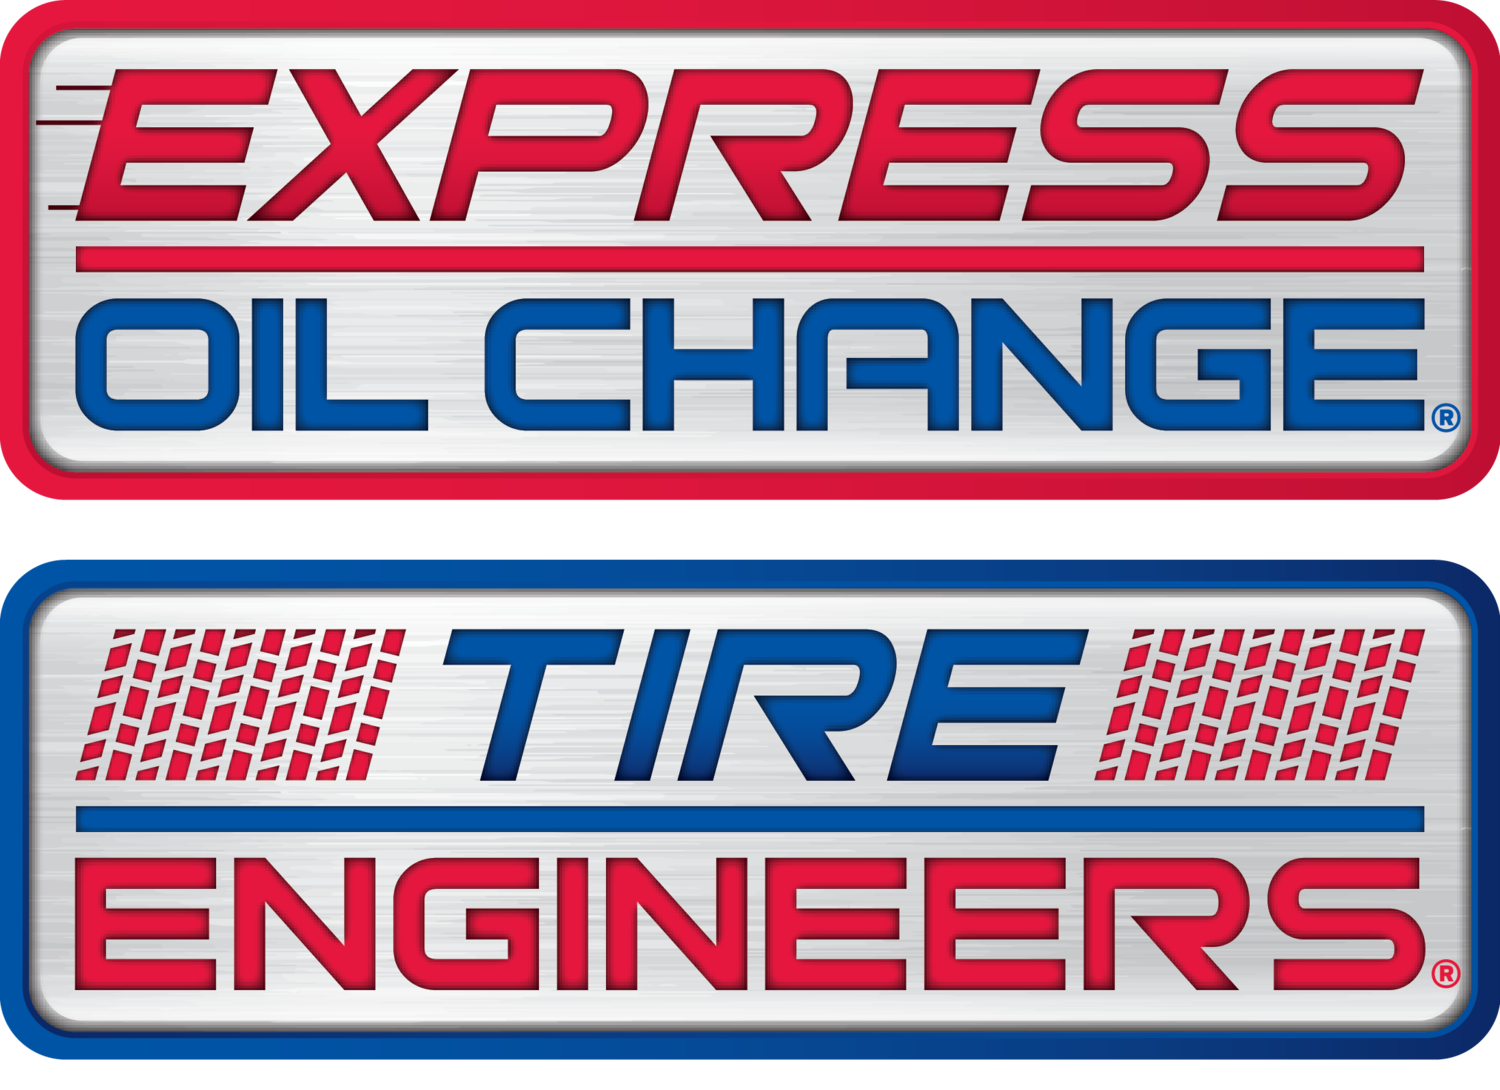 Express Oil Change & Tire Engineers Tricities TN